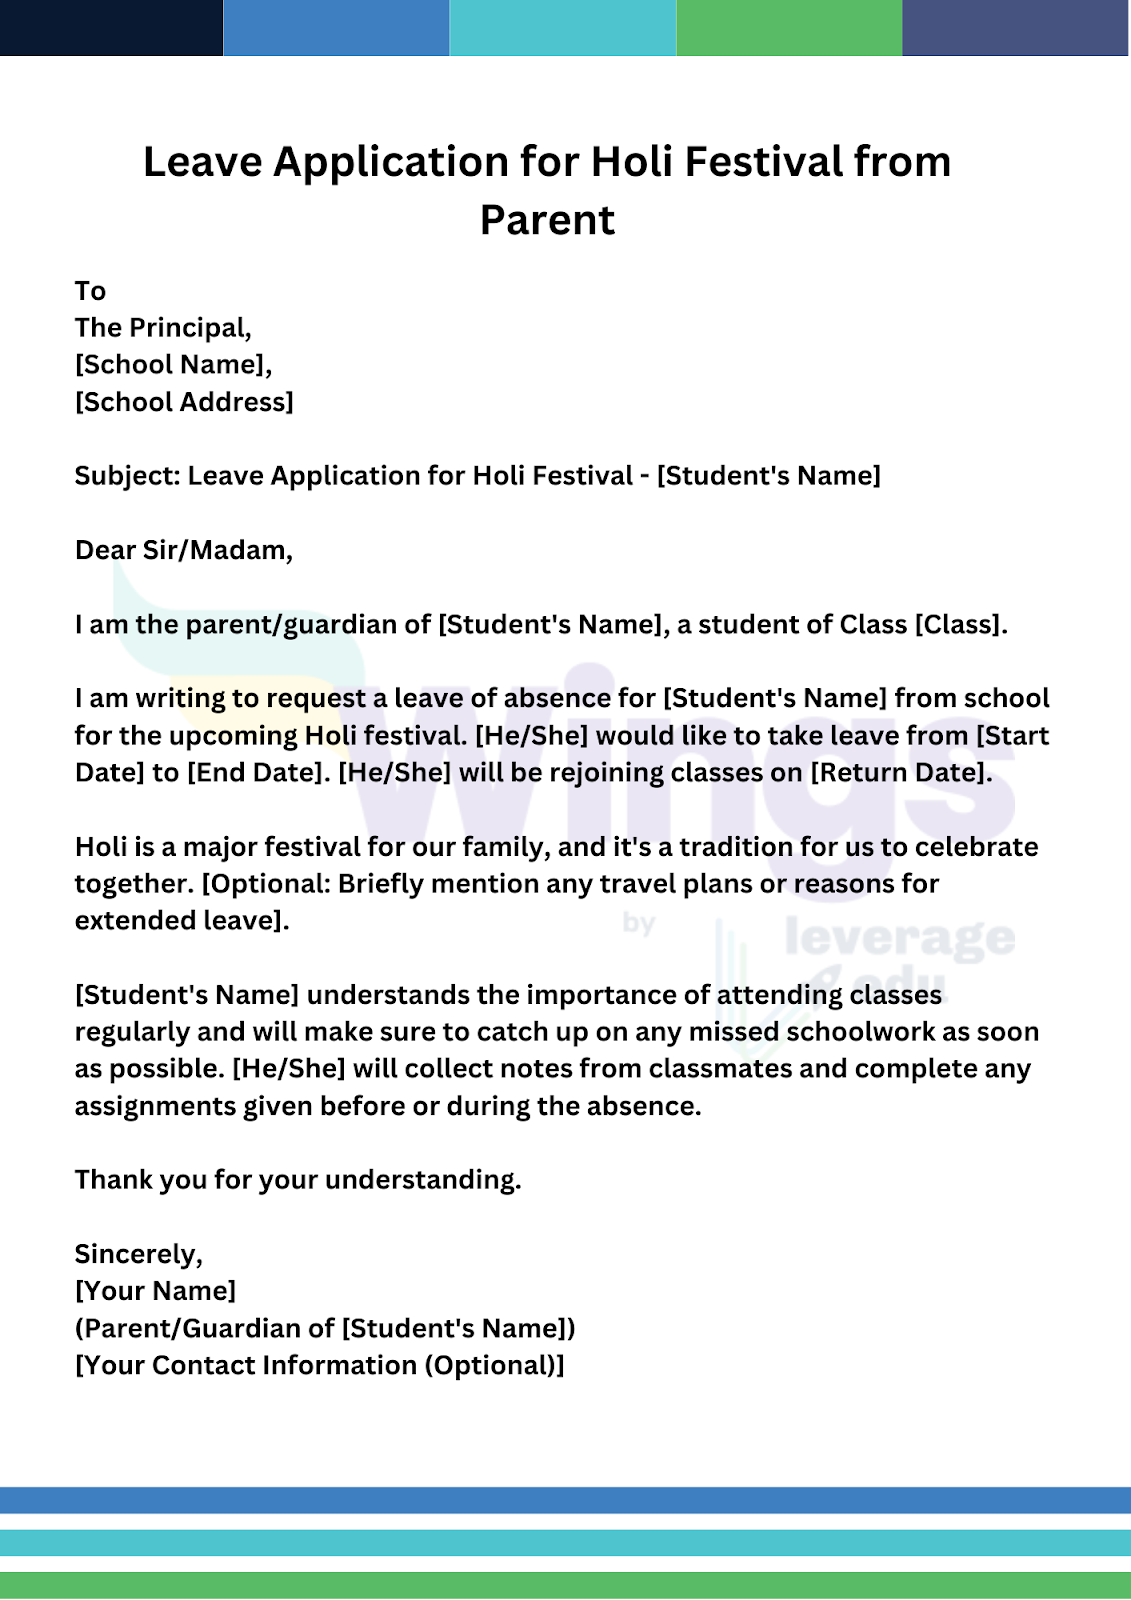 Leave Application for Holi Festival from a Parent of a Student
